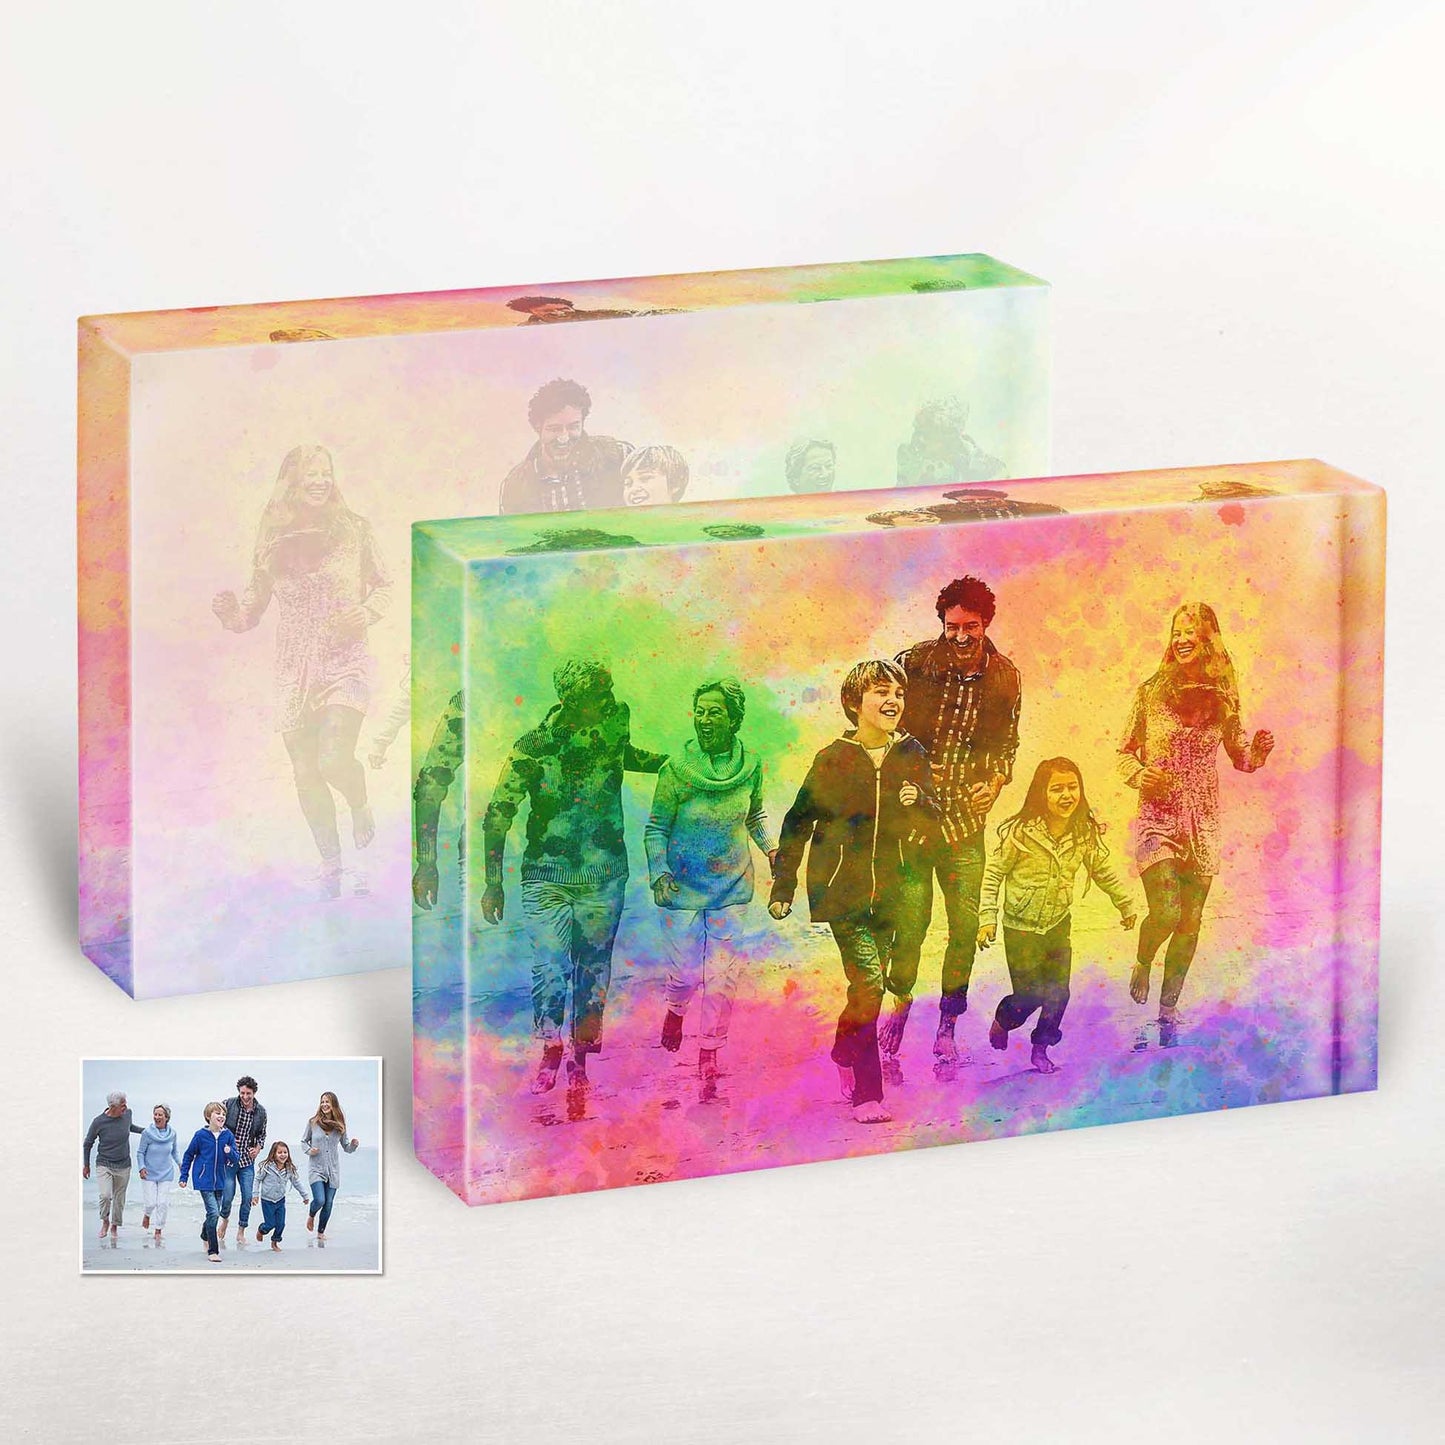 Add a touch of novelty to your home or office with our Personalised Splash of Colours Acrylic Block Photo. Its unconventional design and playful color combinations will captivate the attention of your guests, leaving a lasting impression.